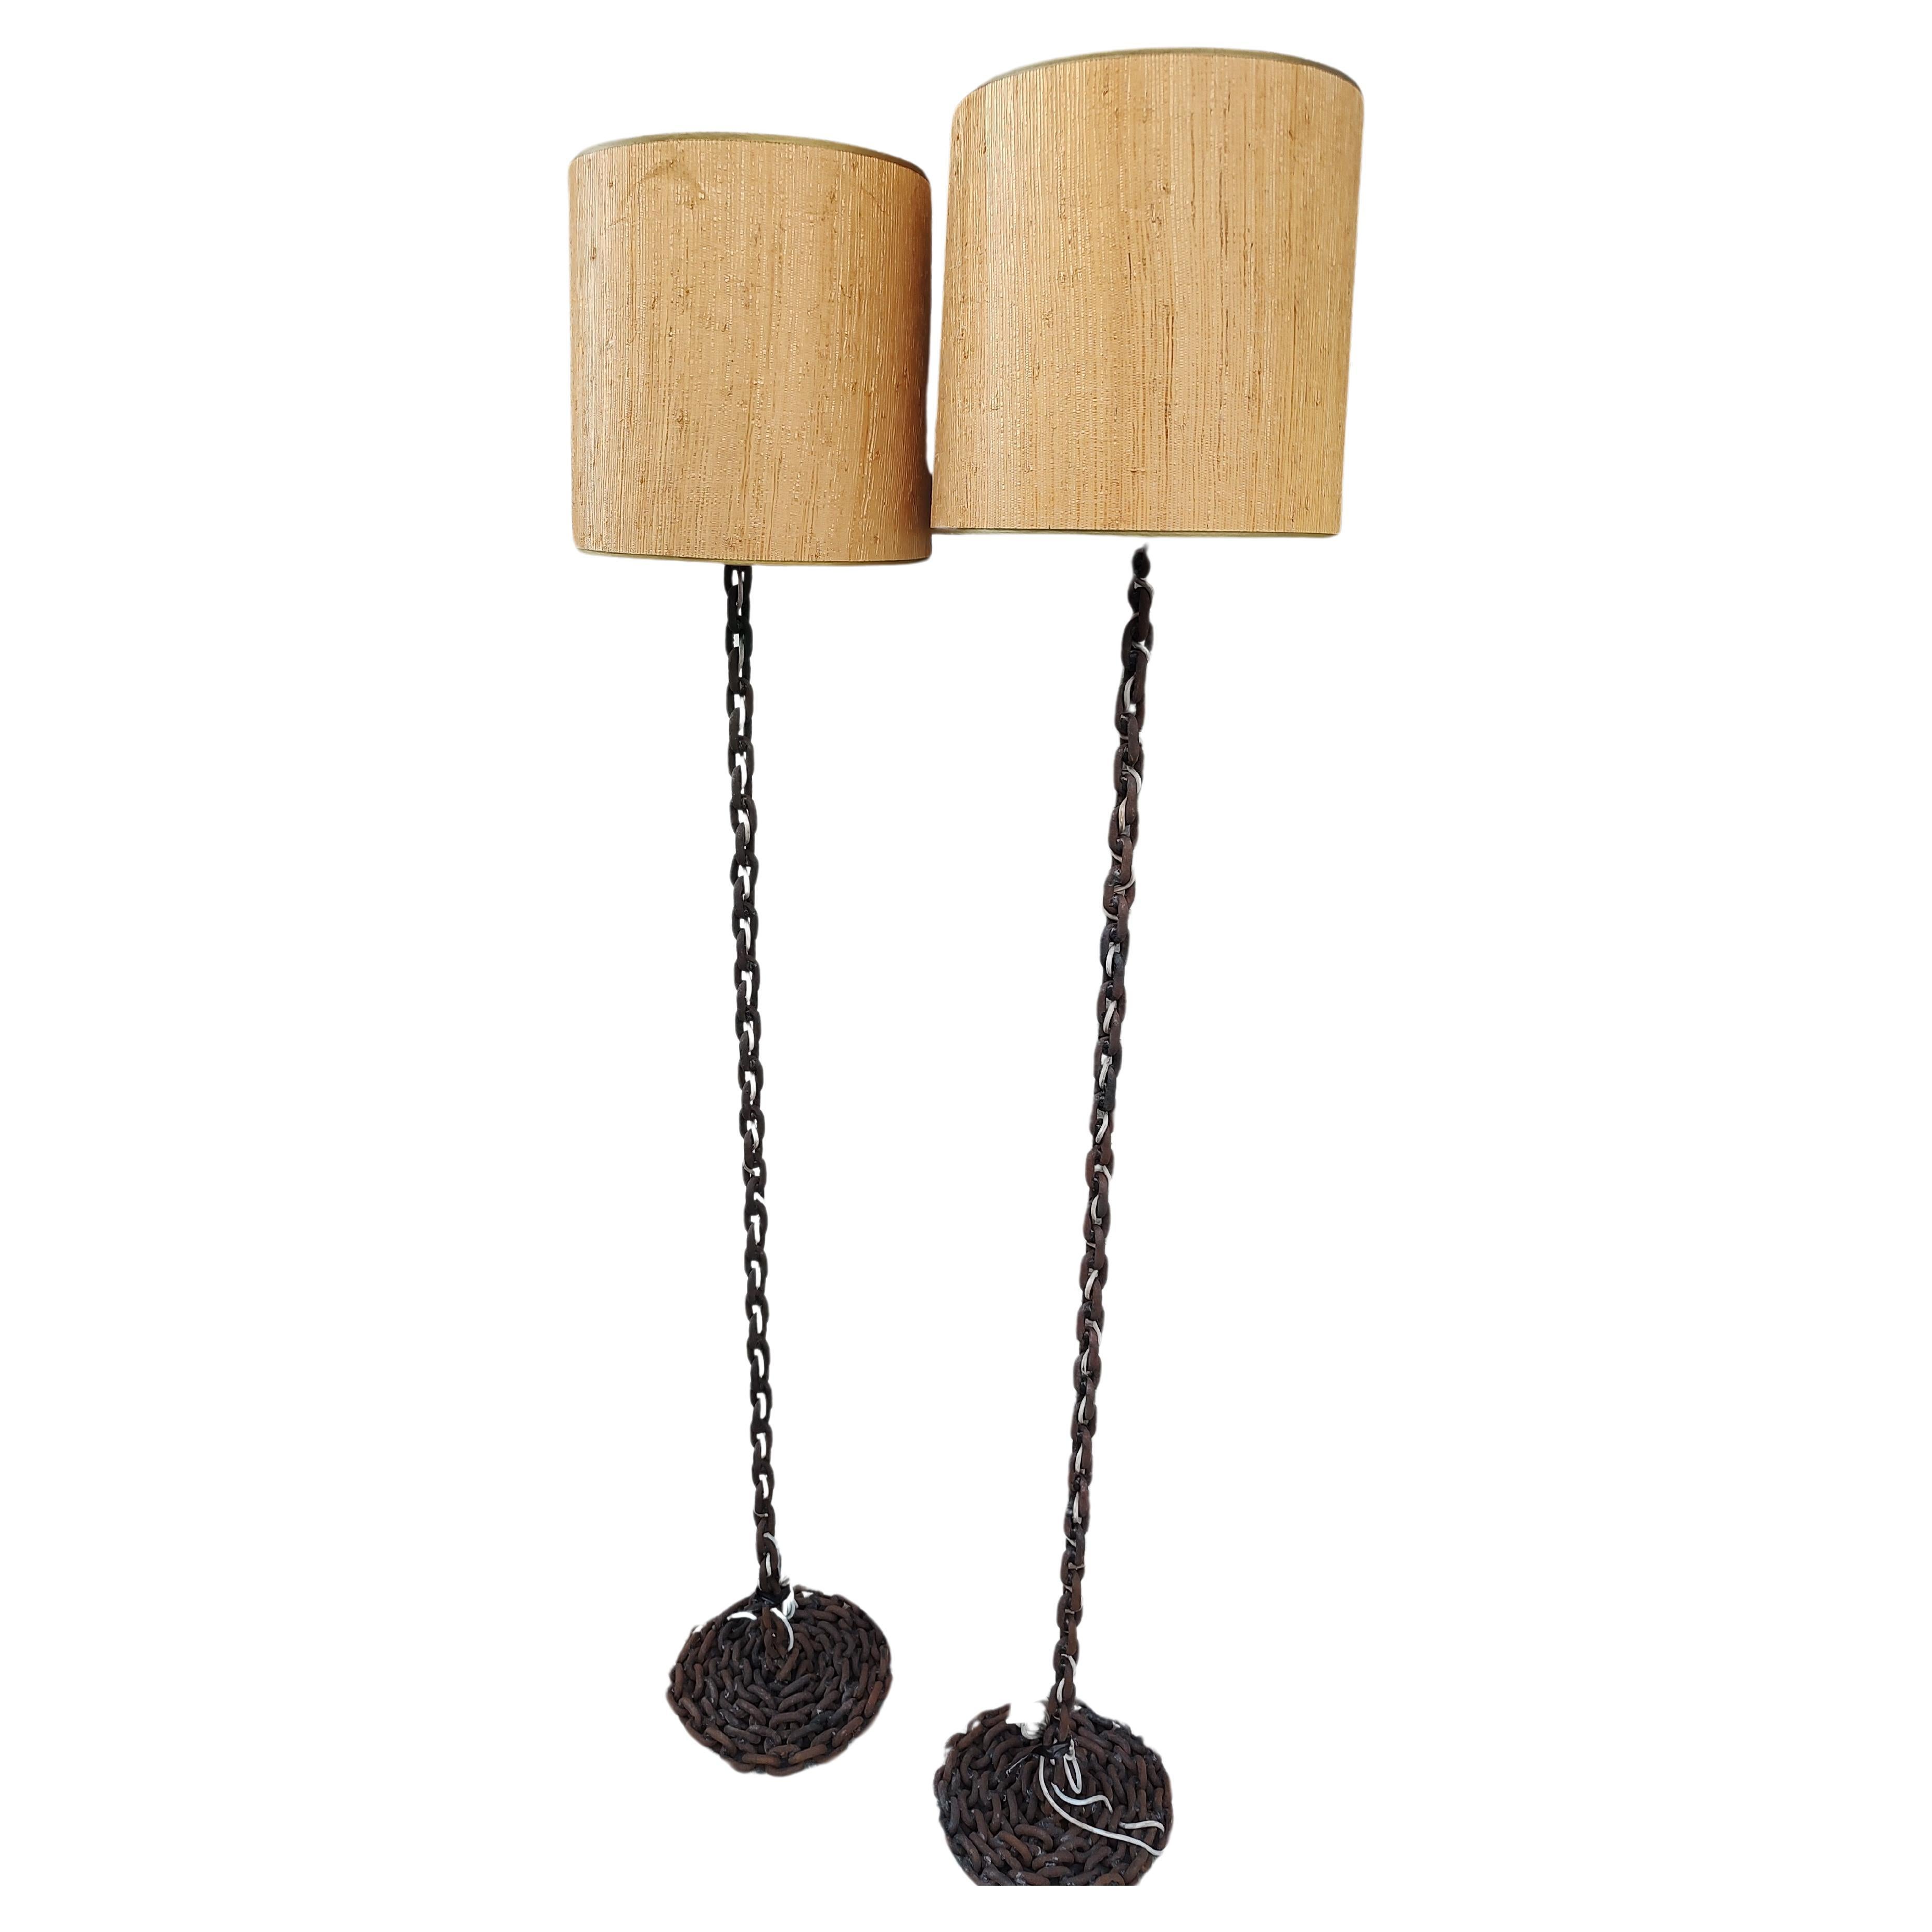 Pair of Mid-Century Modern Sculptural Brutalist Chain Rope Floor Lamps For Sale